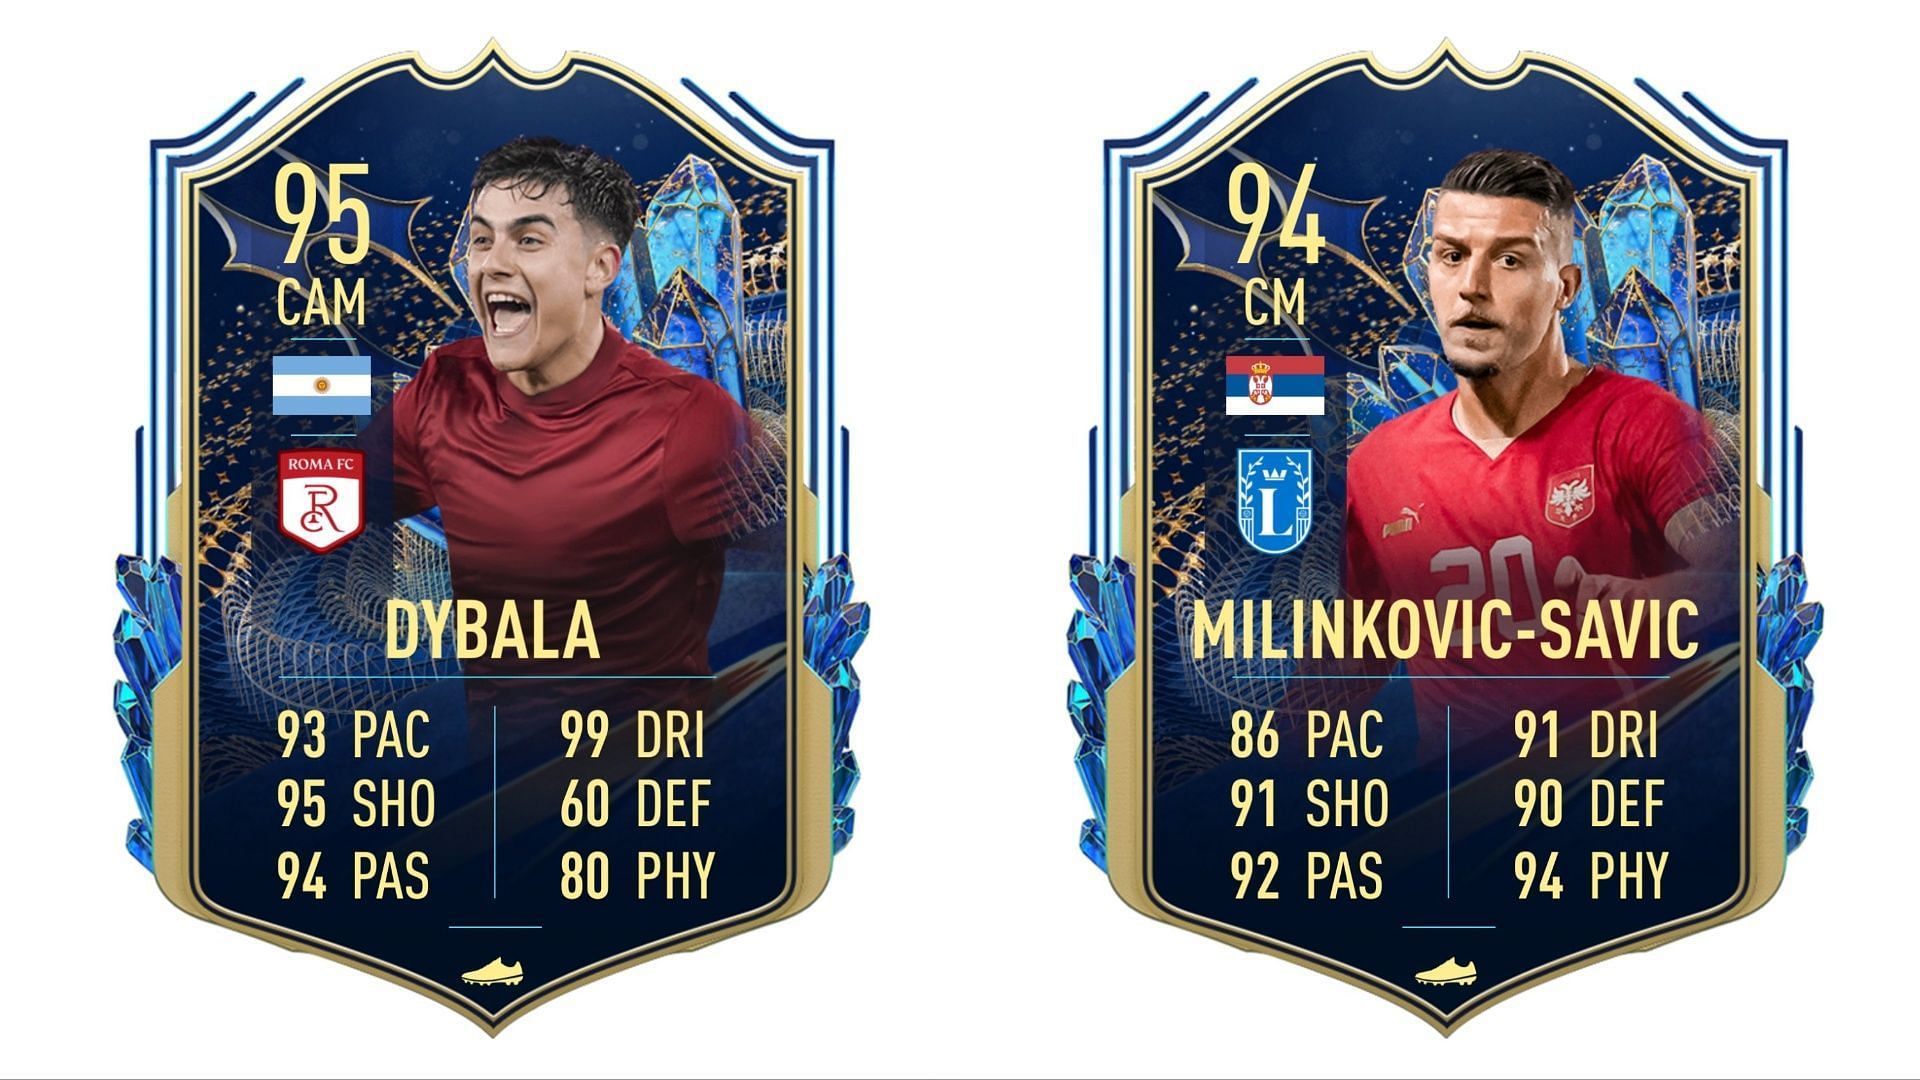 TOTS Dybala and Milinkovic-Savic have been leaked (Images via Twitter/FIFA23Leaked_)